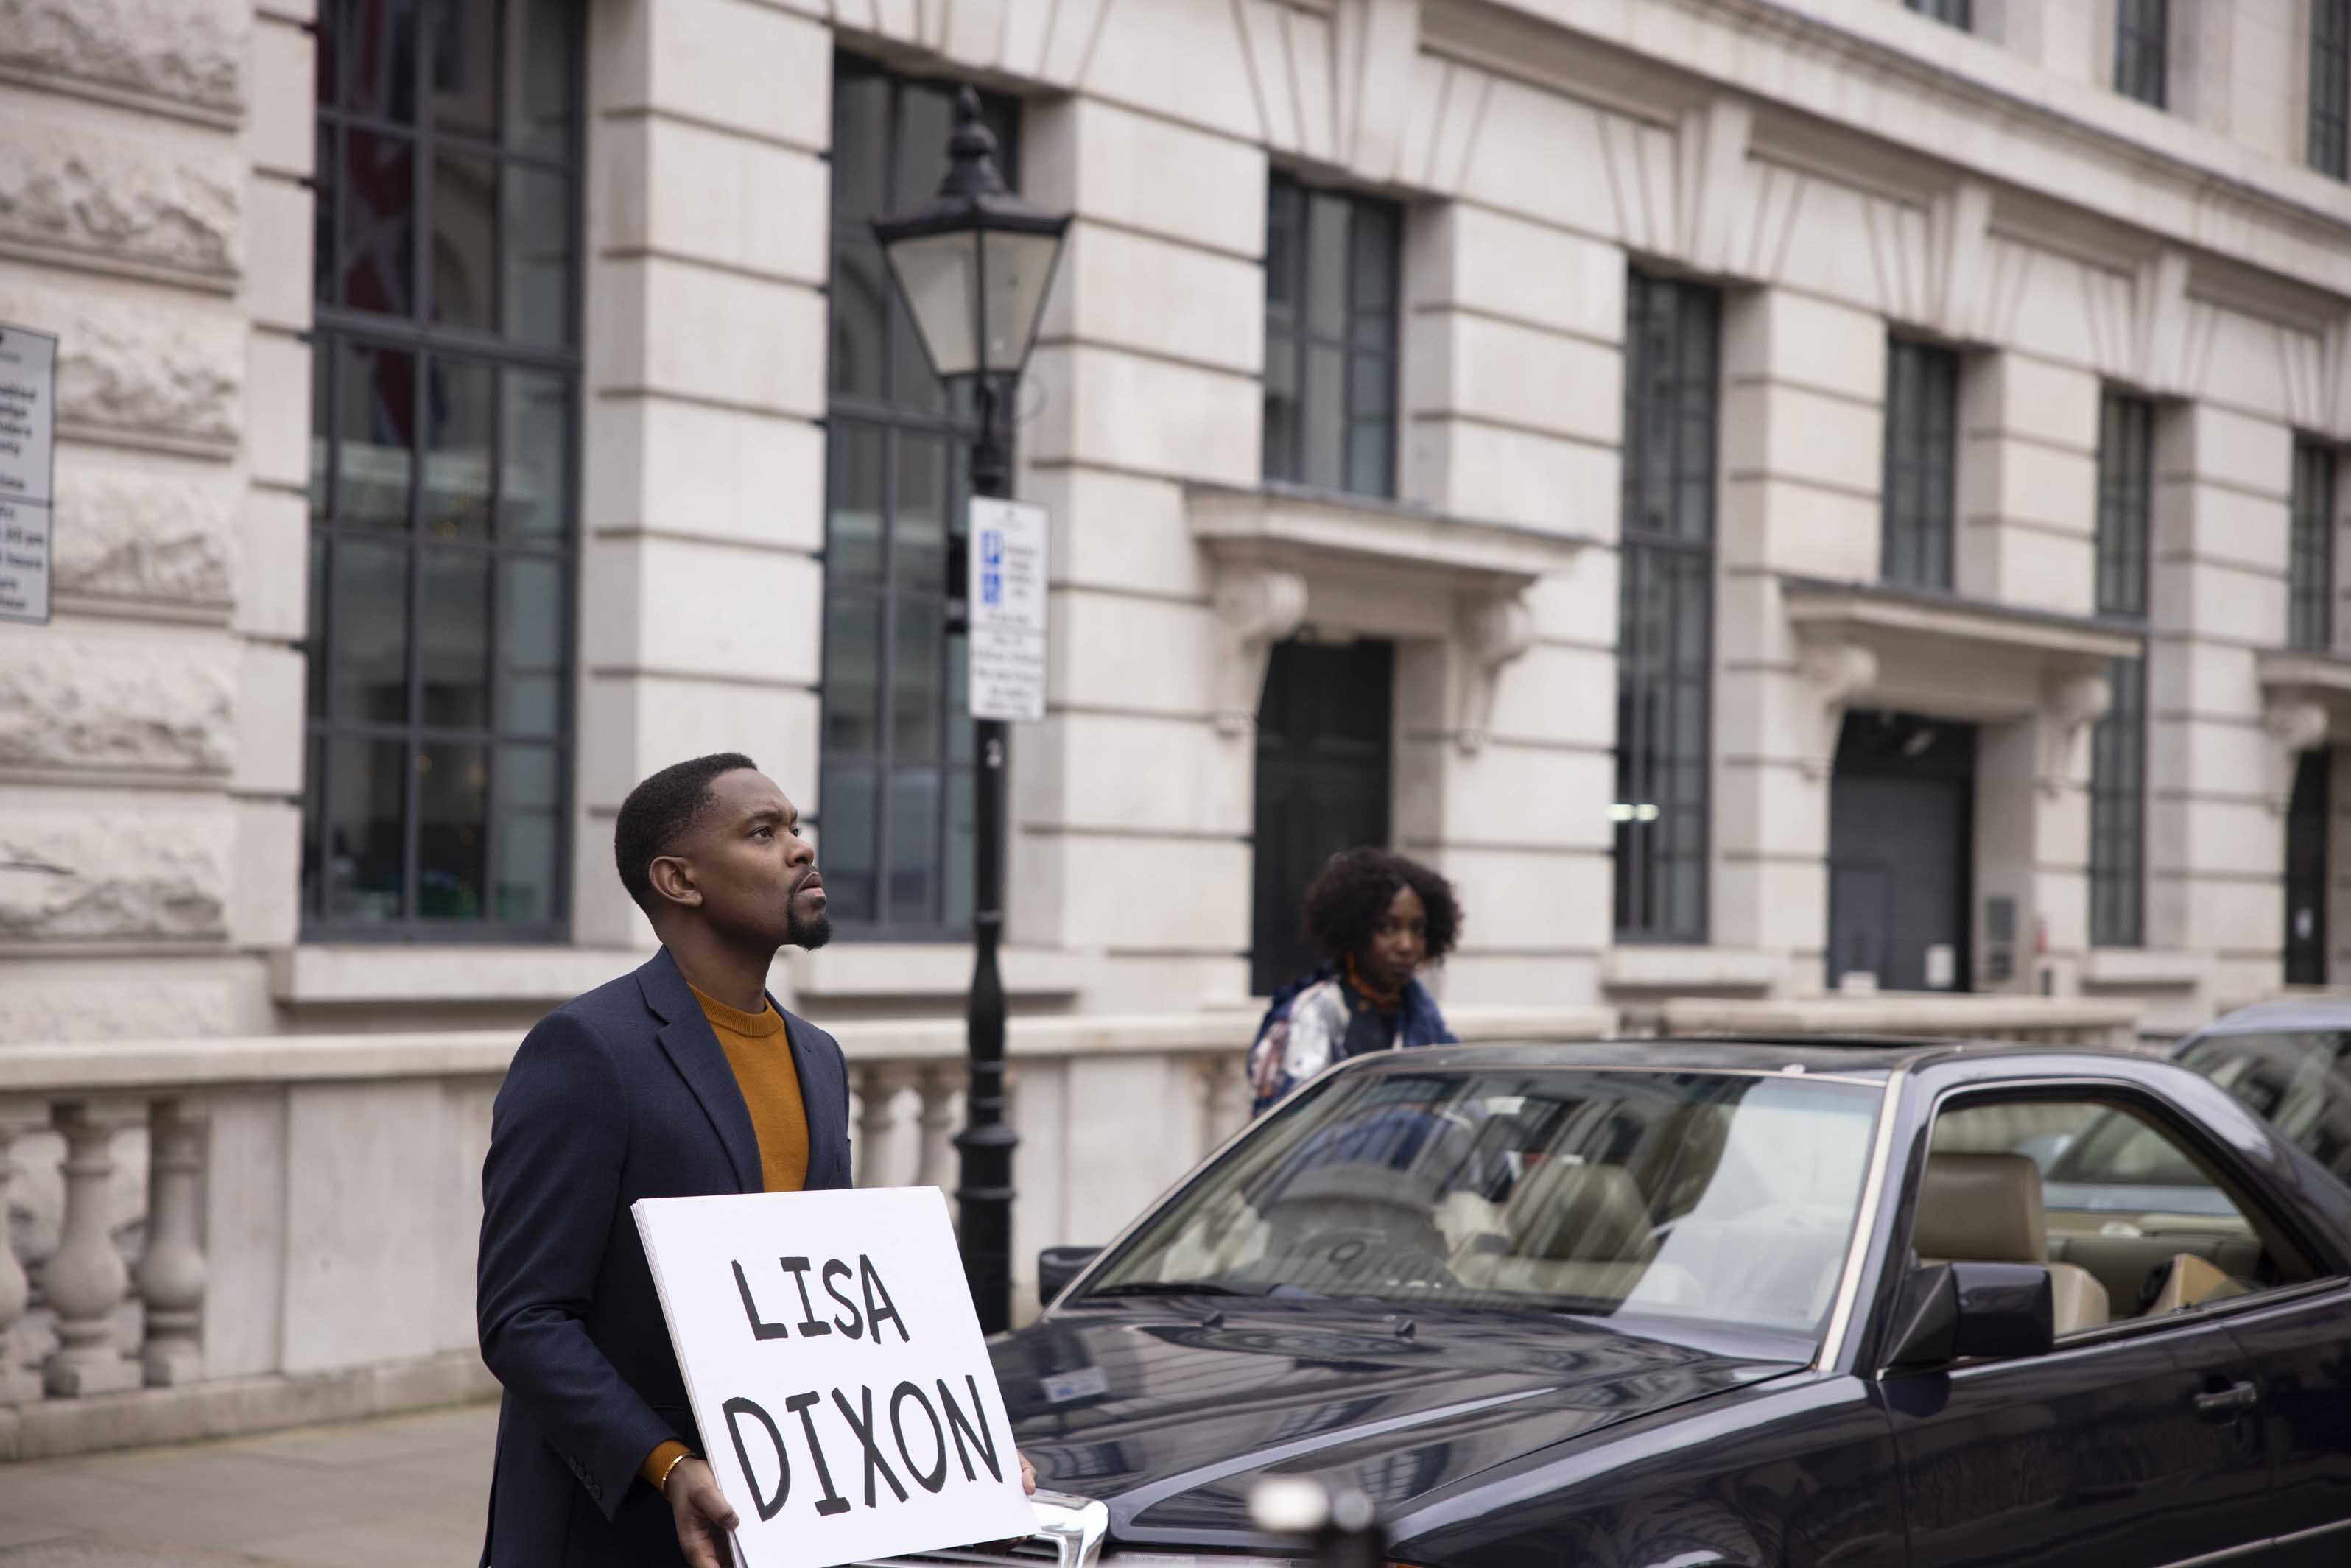 Aml Ameen as Melvin in a scene from Boxing Day, standing in the street holding a sign that reads 'Lisa Dixon'